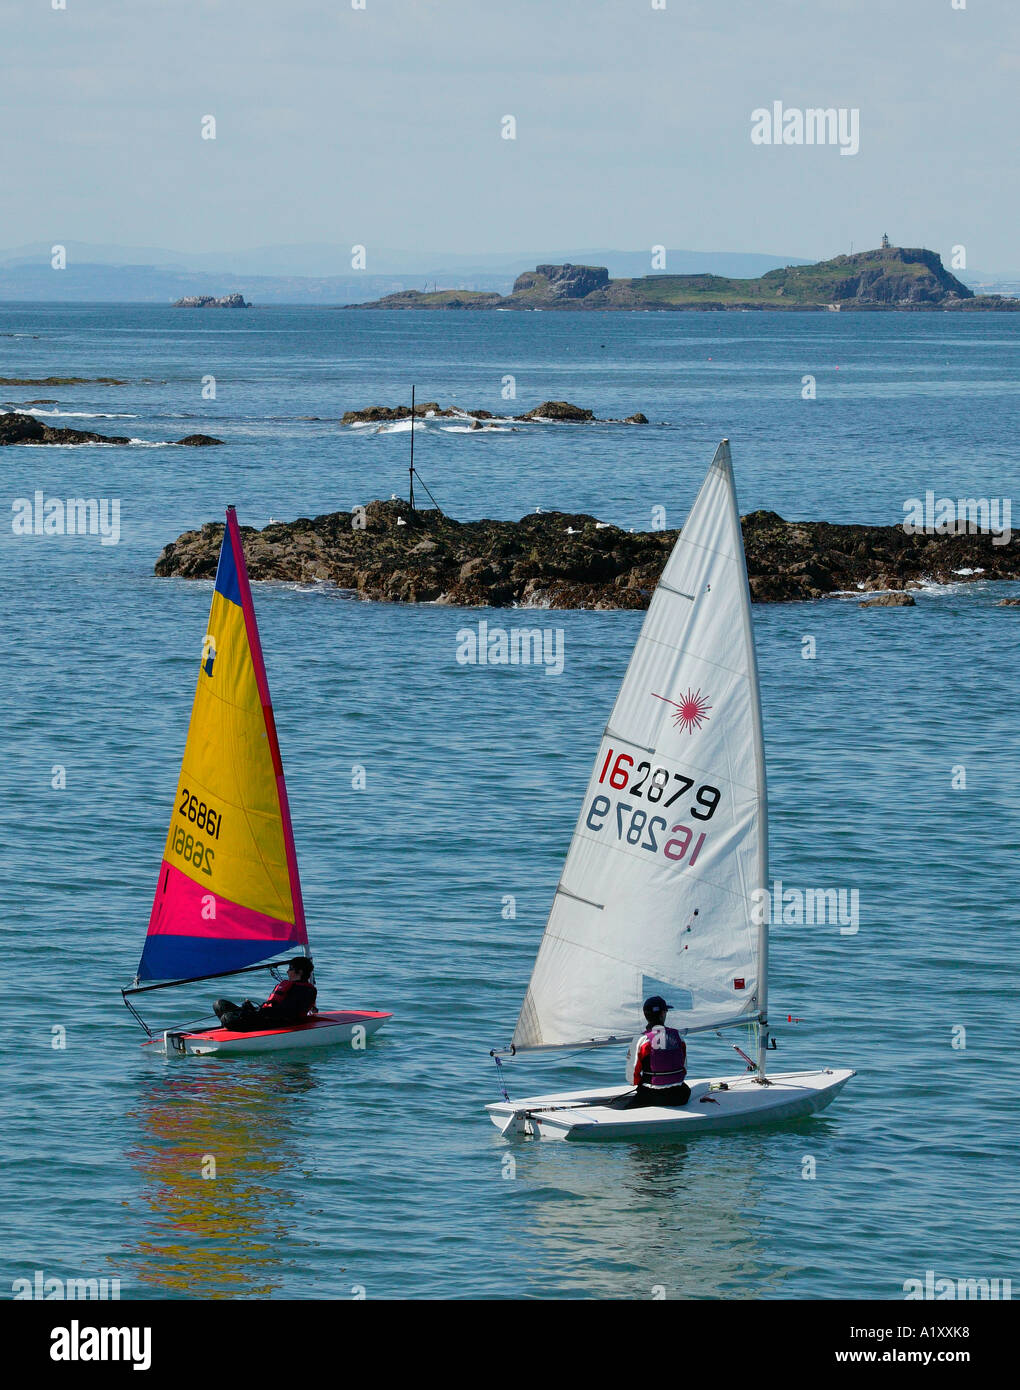 Single handed sailing dinghies sailing in the Forth Estuary, North Berwick, Scotland, UK G B, Europe, Stock Photo